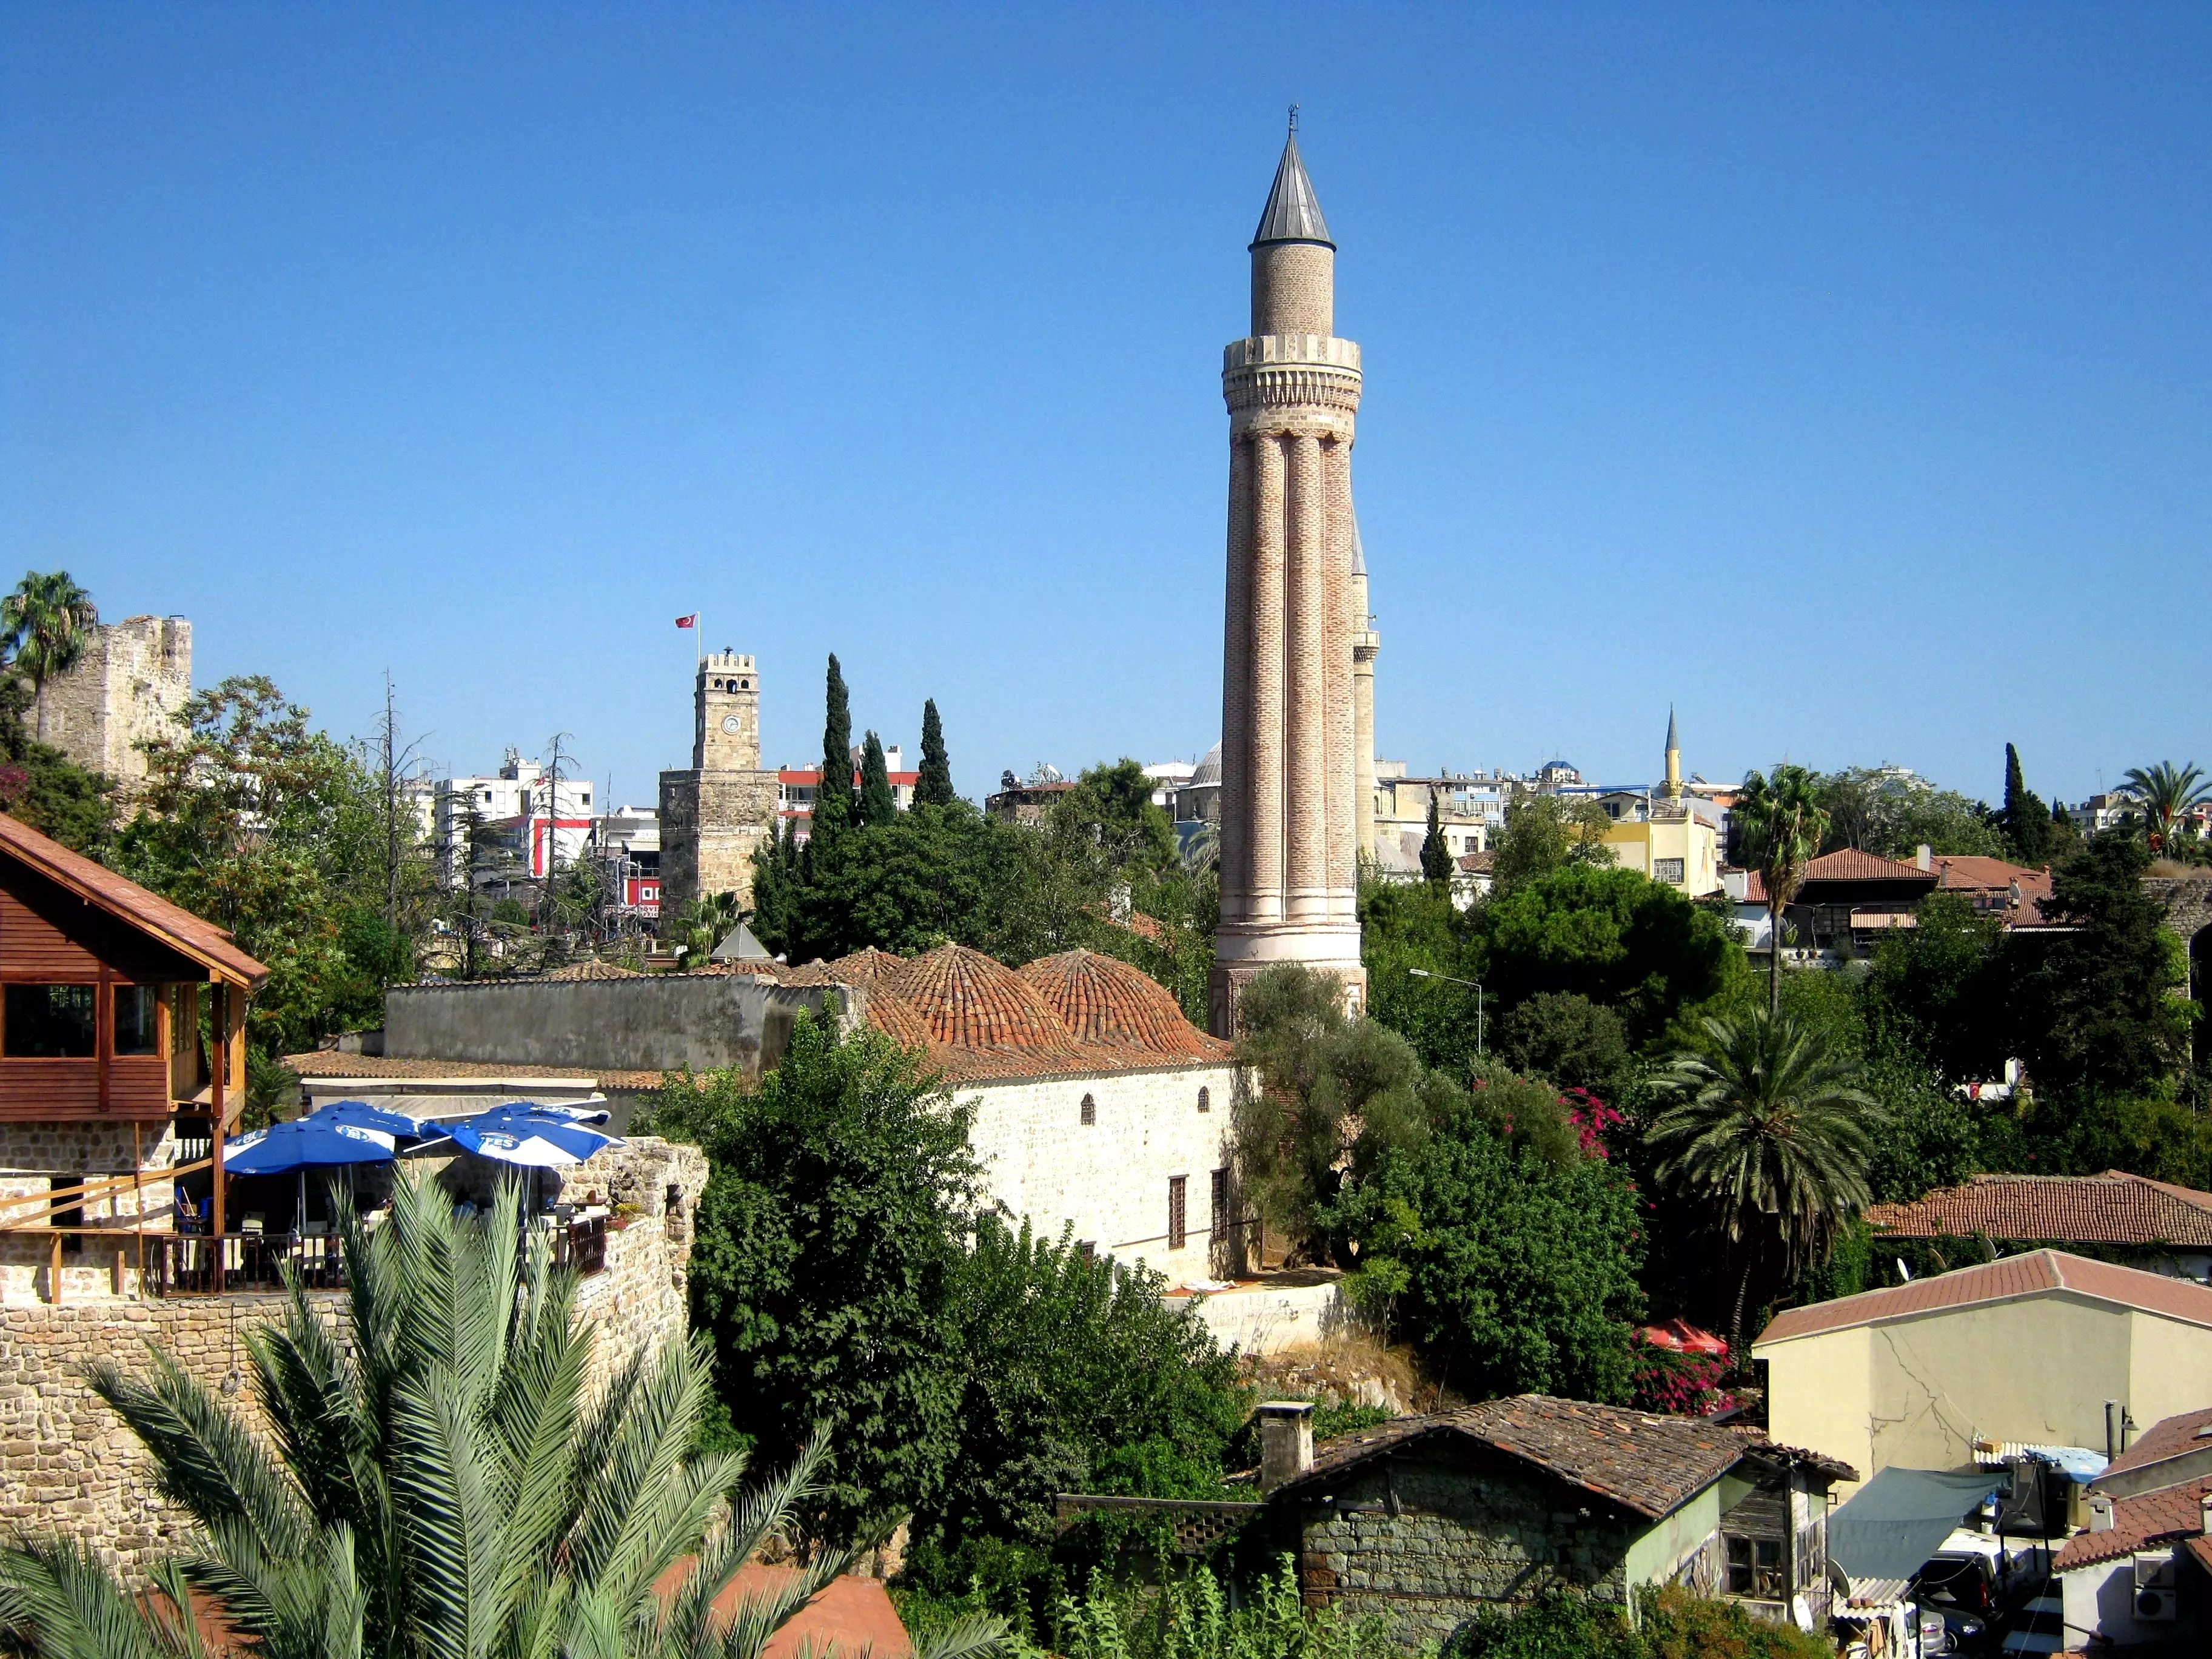 Yivli Minaret in Turkey, Central Asia | Architecture - Rated 3.8